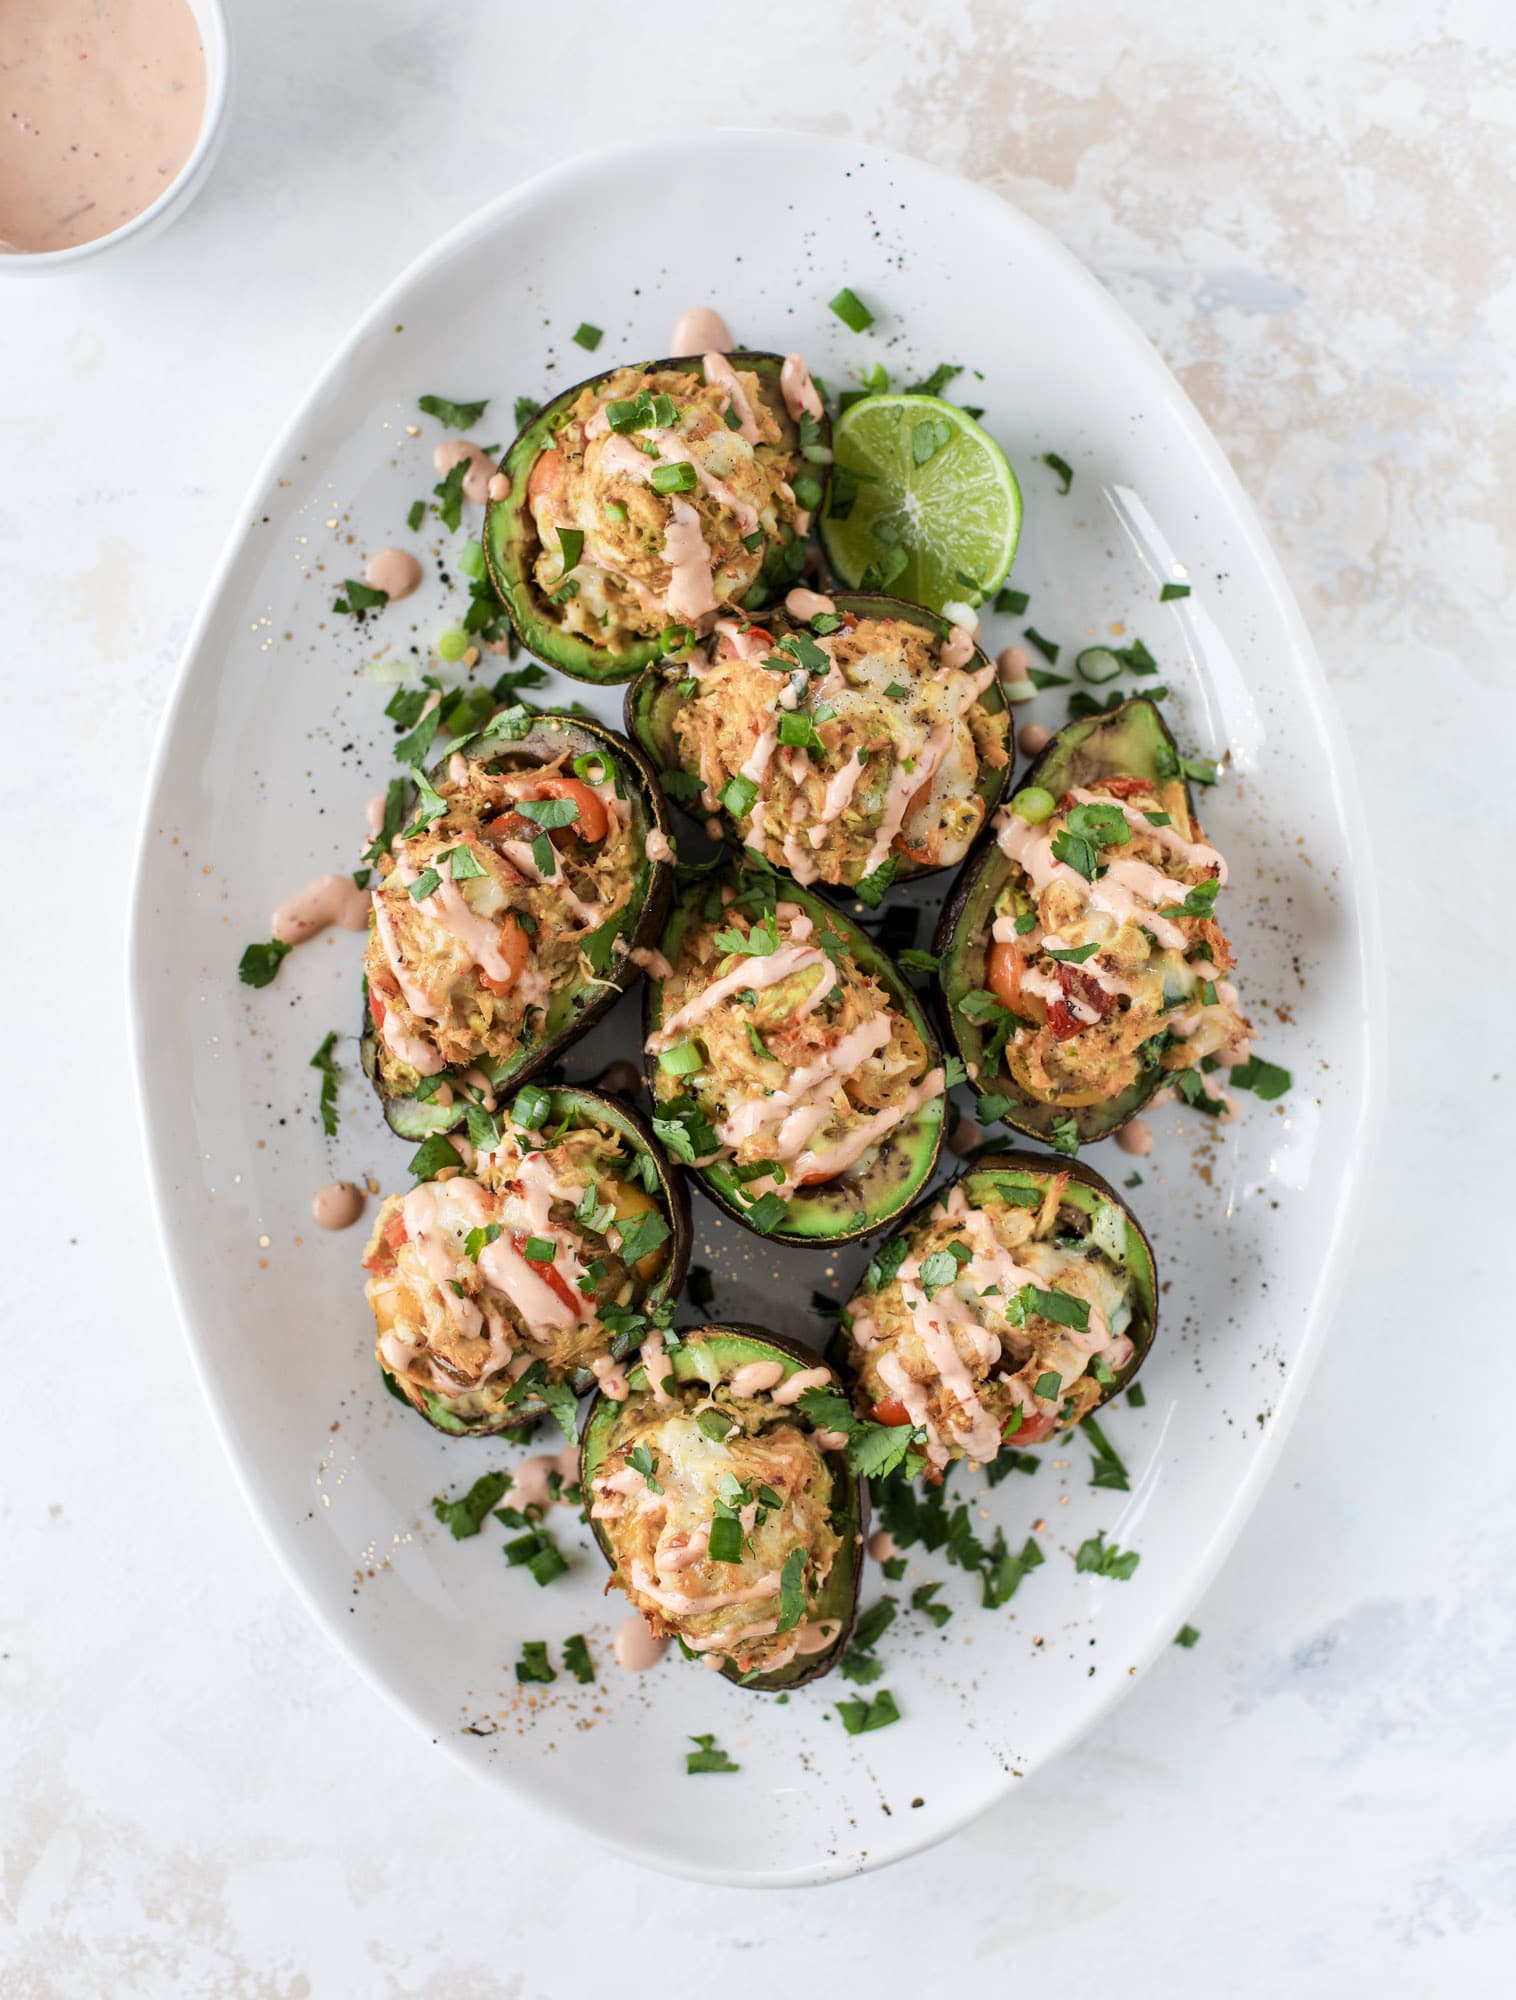 These baked avocados are stuffed with a cheesy chicken mixture and drizzled with sriracha yogurt sauce! Super delicious and an easy weeknight meal. I howsweeteats.com #baked #avocados